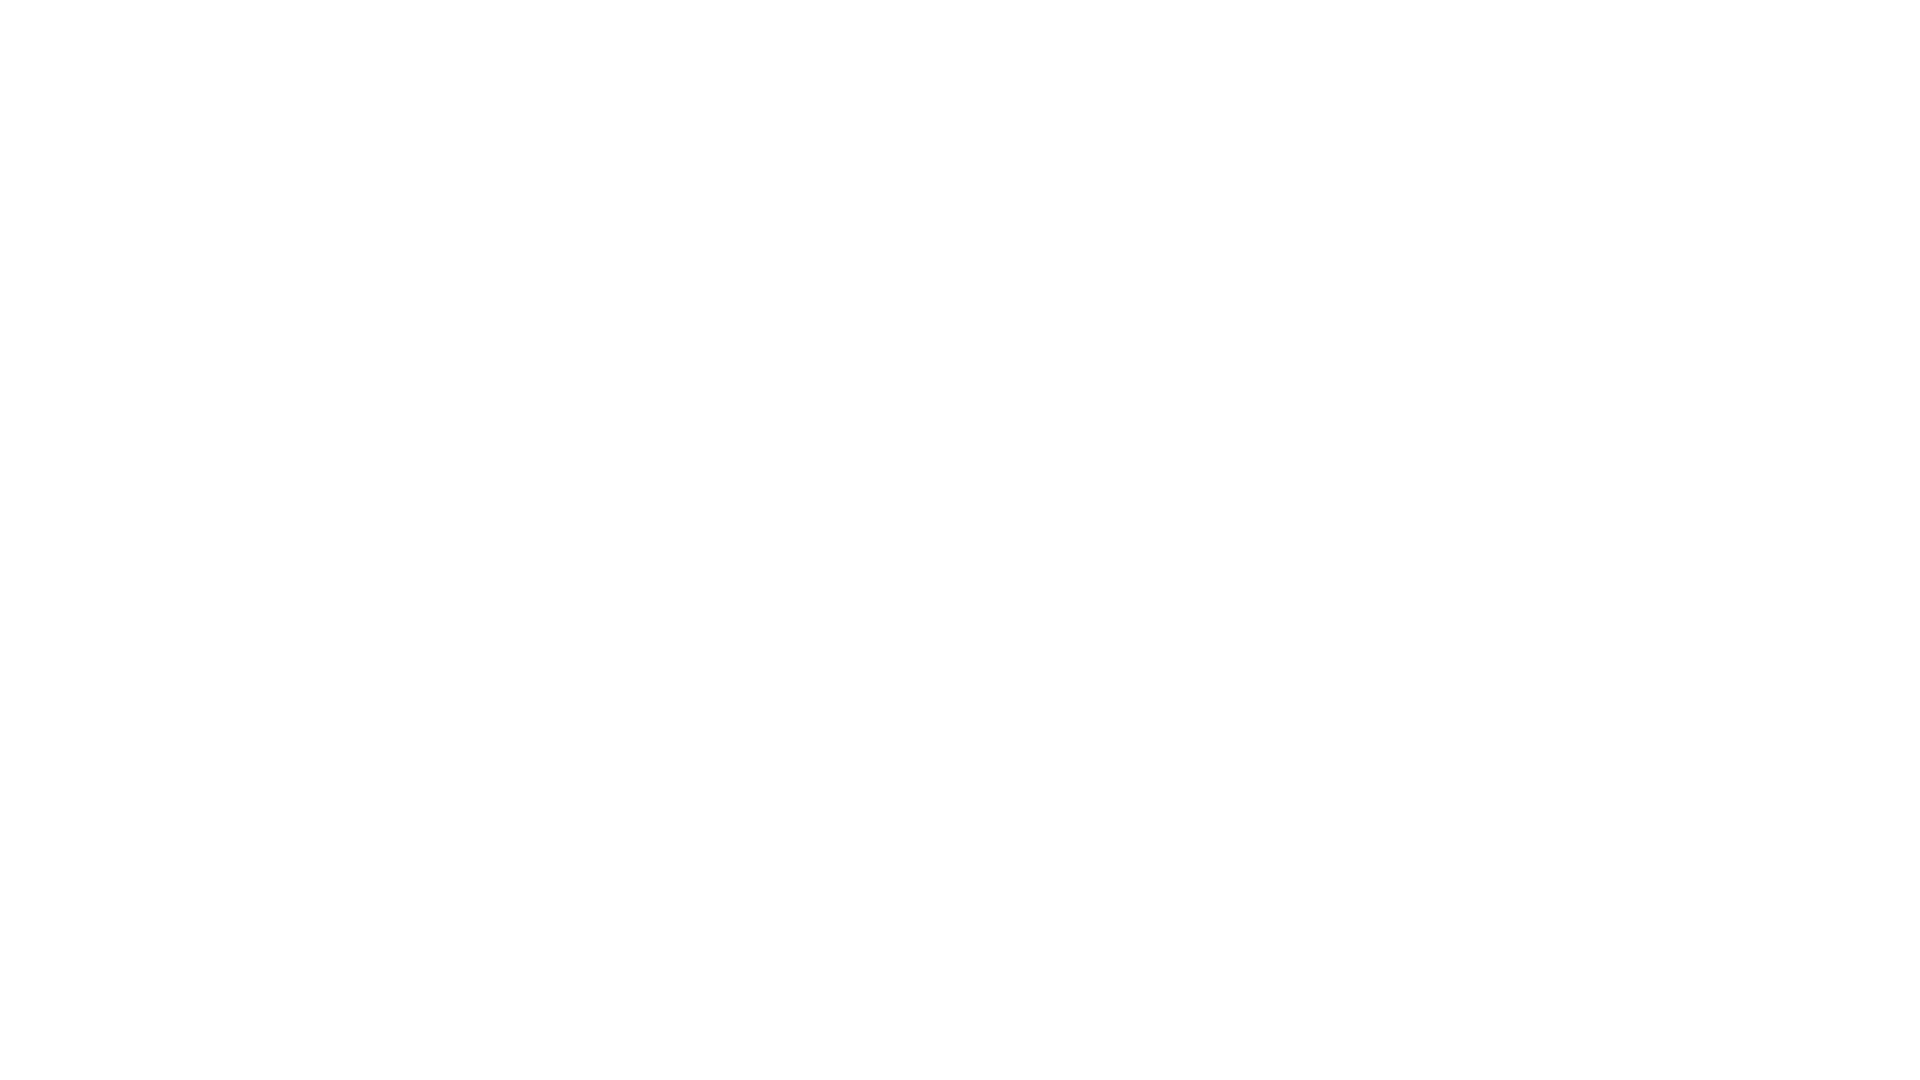 2010 kid wimpy of diary a Baby